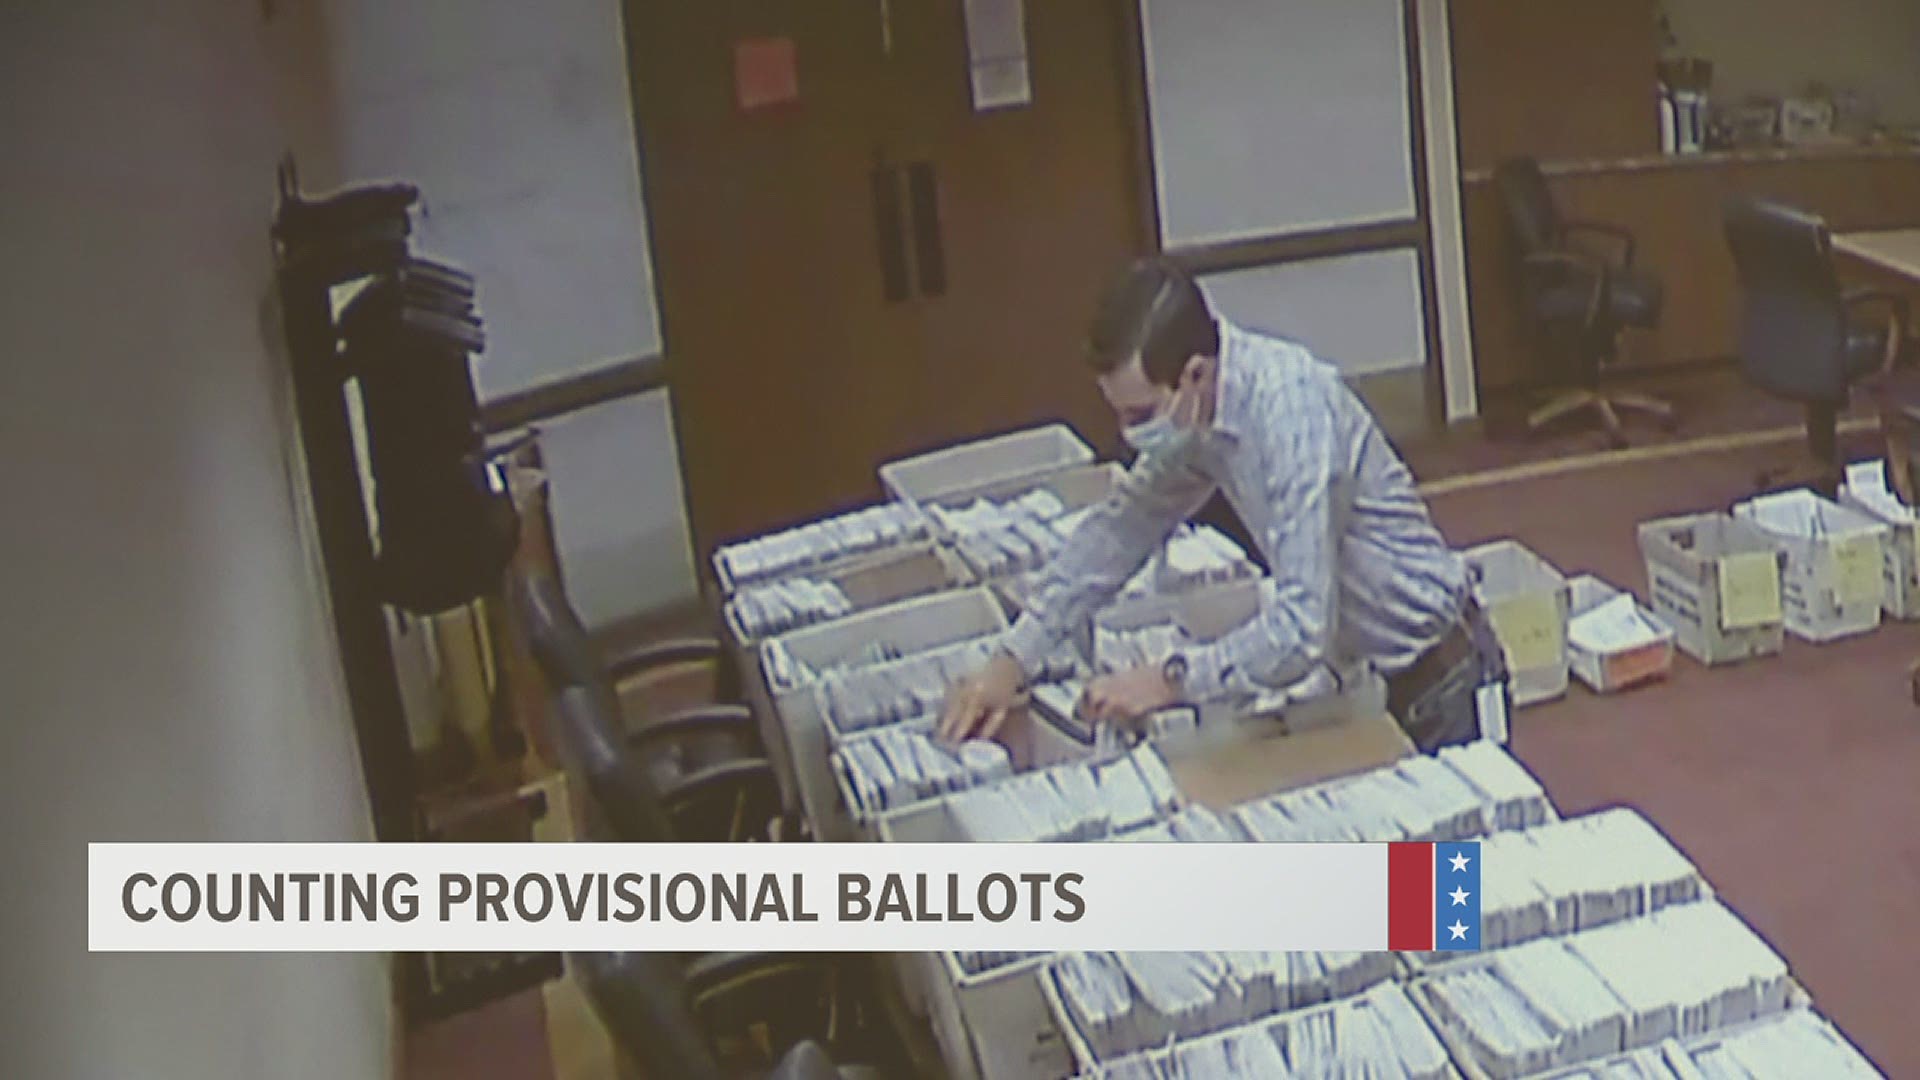 Provisional and military ballots are still being counted, as well as mail-in ballots